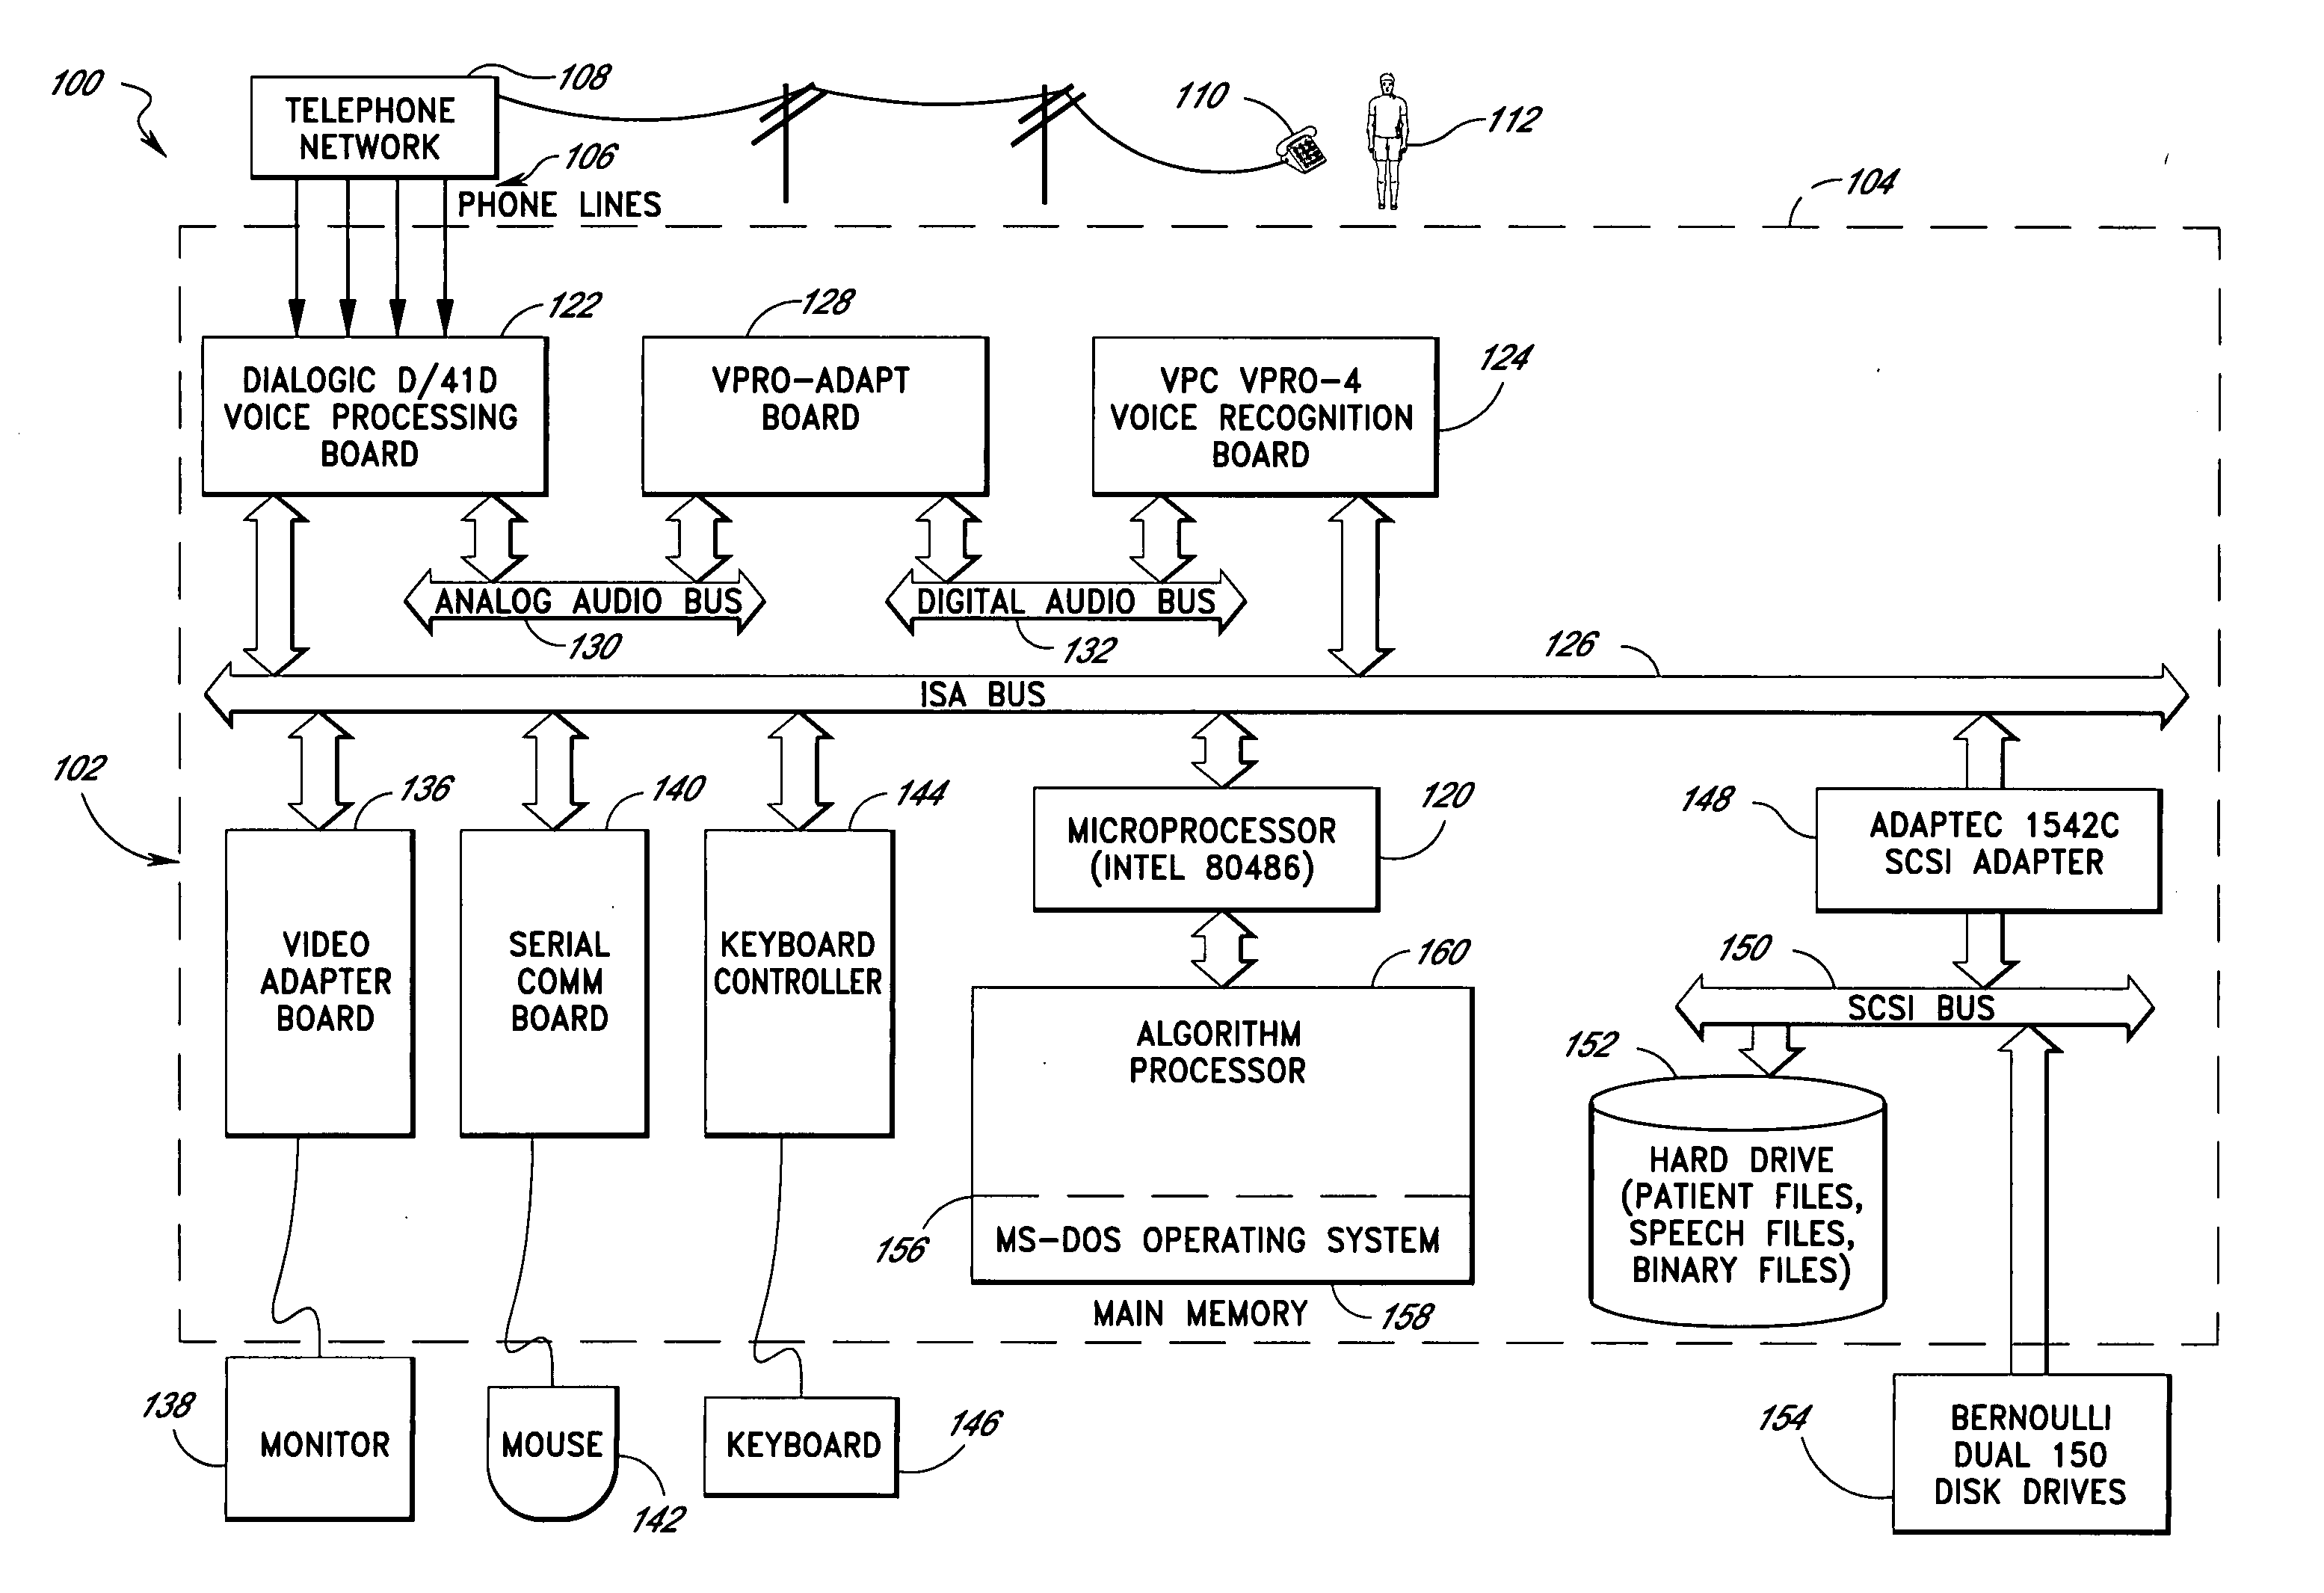 Computerized medical diagnostic and treatment advice system including network access